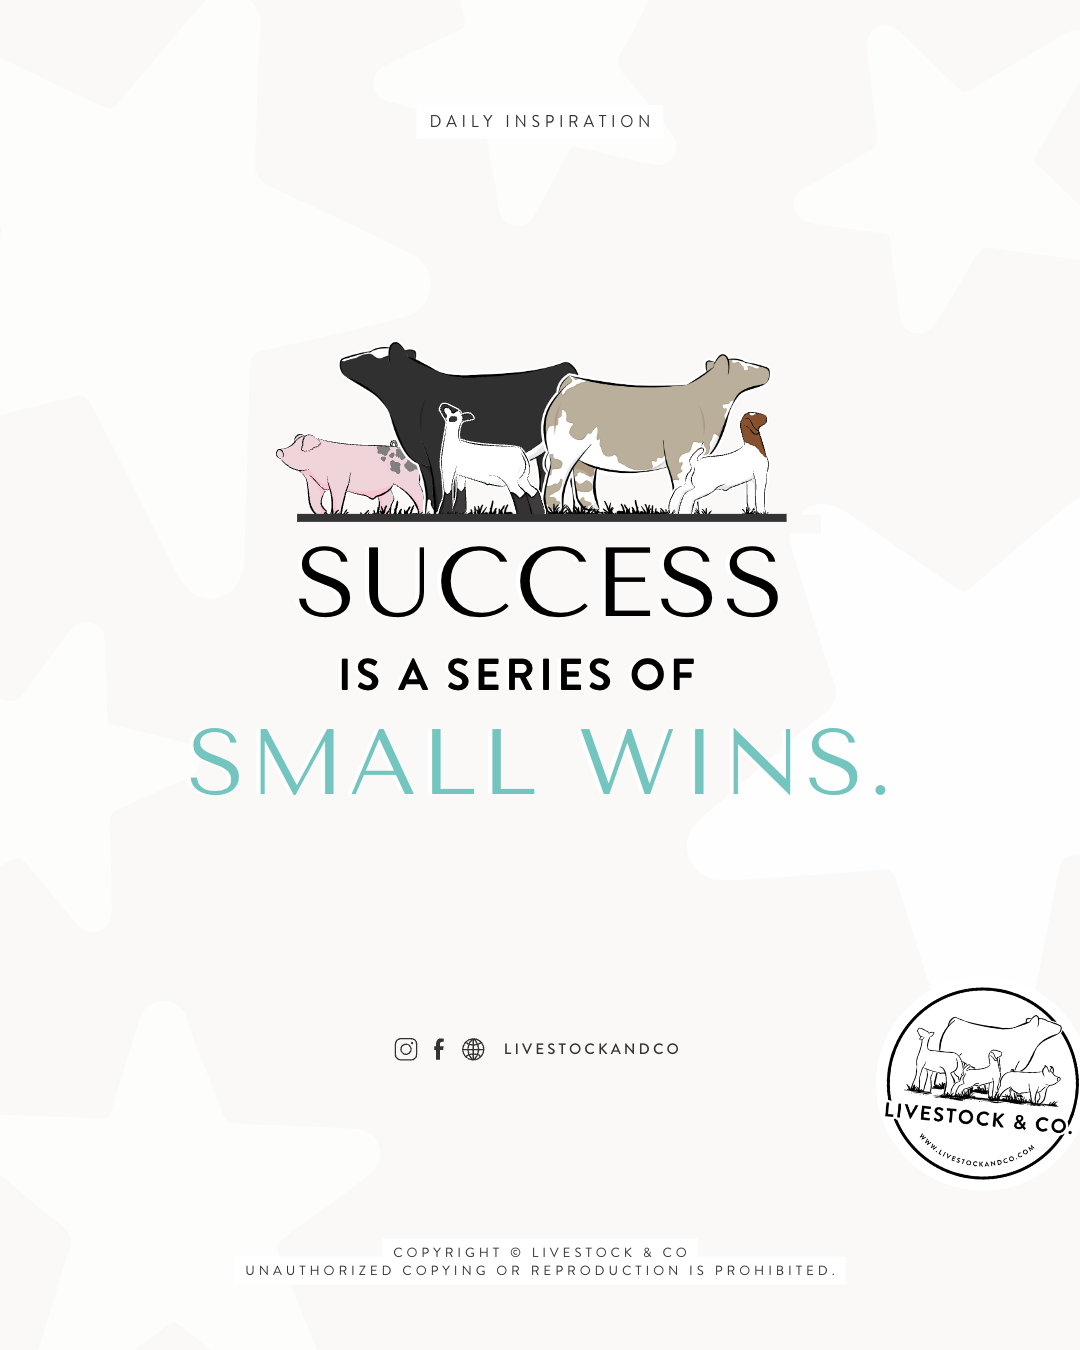 Success is a series of small wins - Livestock & Co.